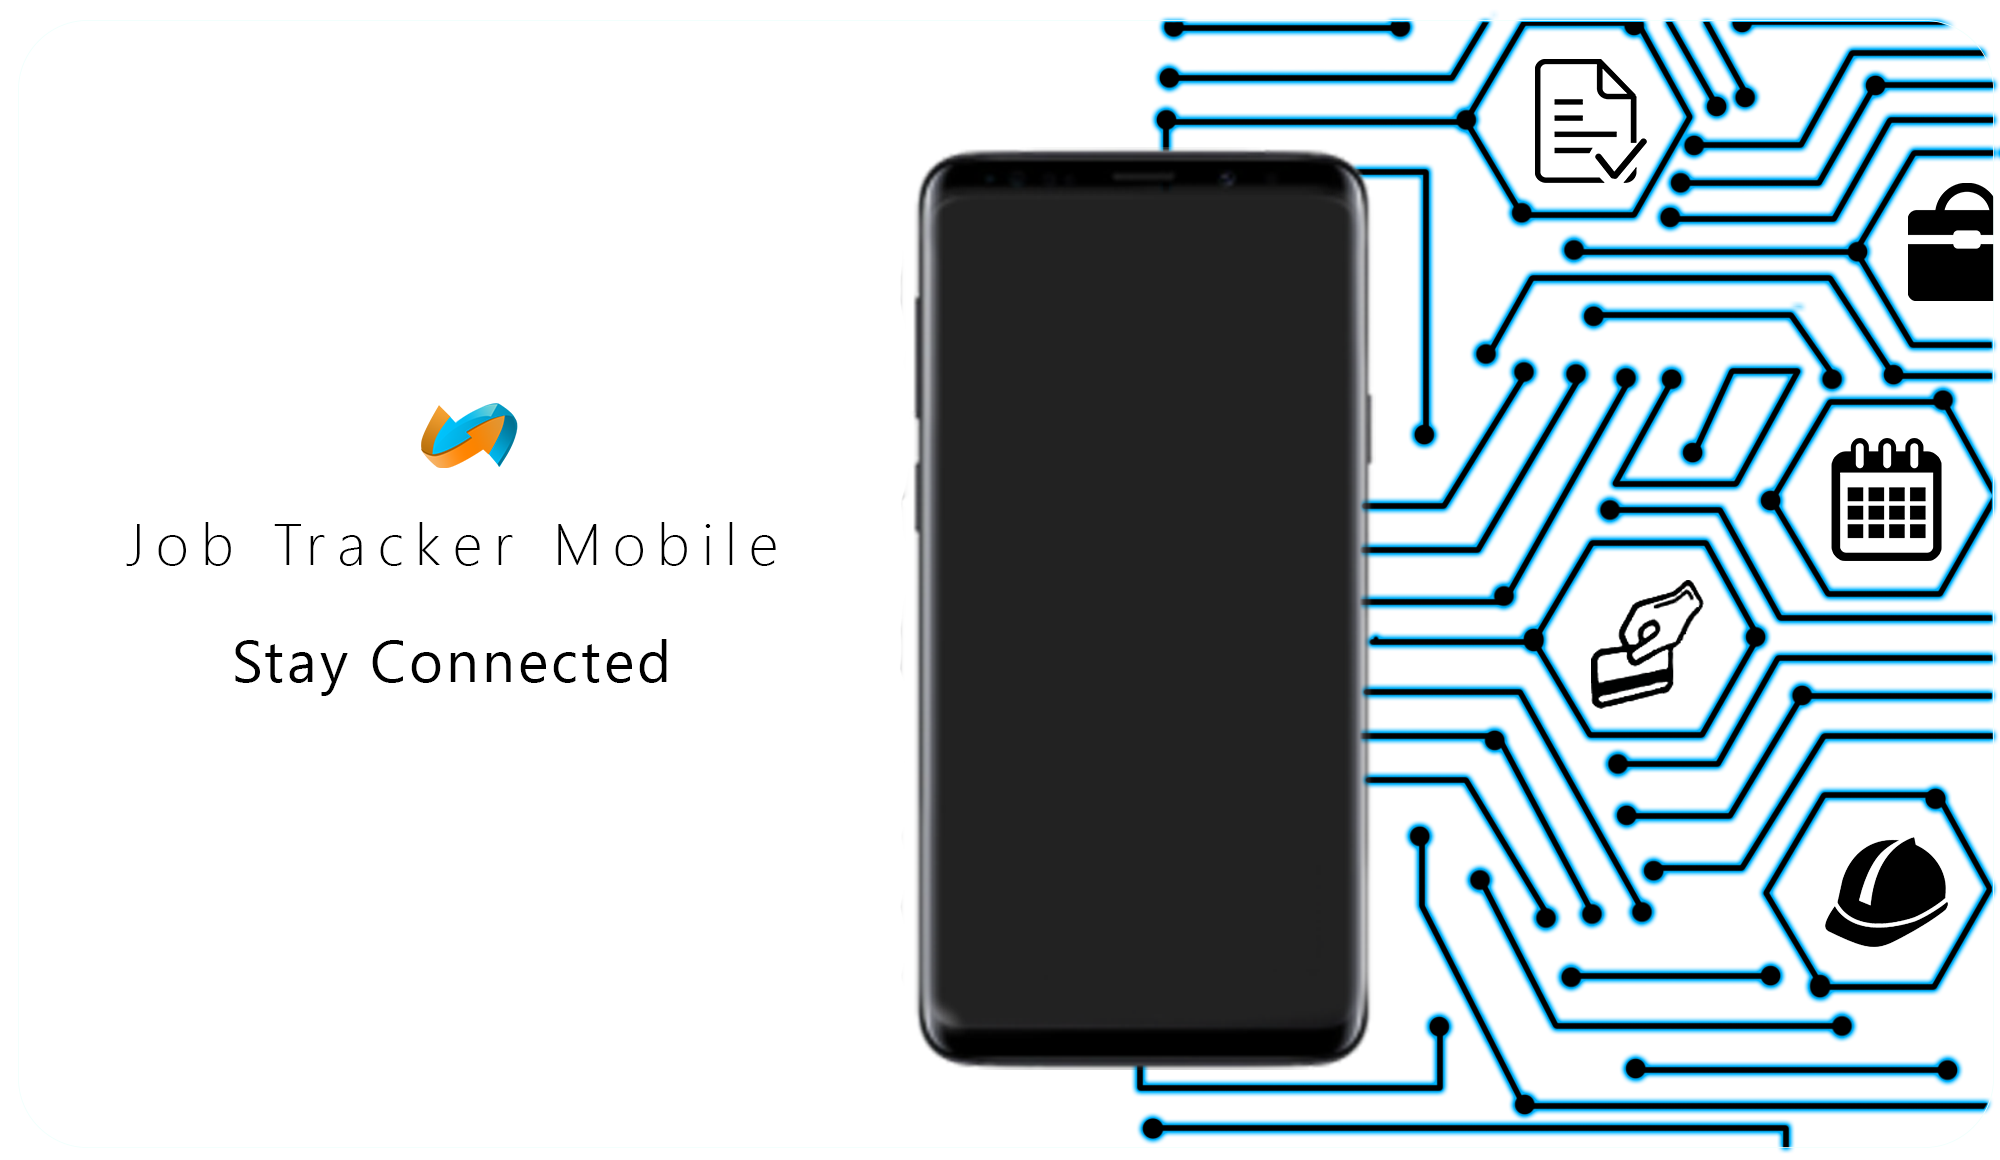 Stay Connected with Job Tracker Mobile. The mobile app that enable engineers on the go to connect seamlessly with your advance desktop-based Job Tracker Professional solution.